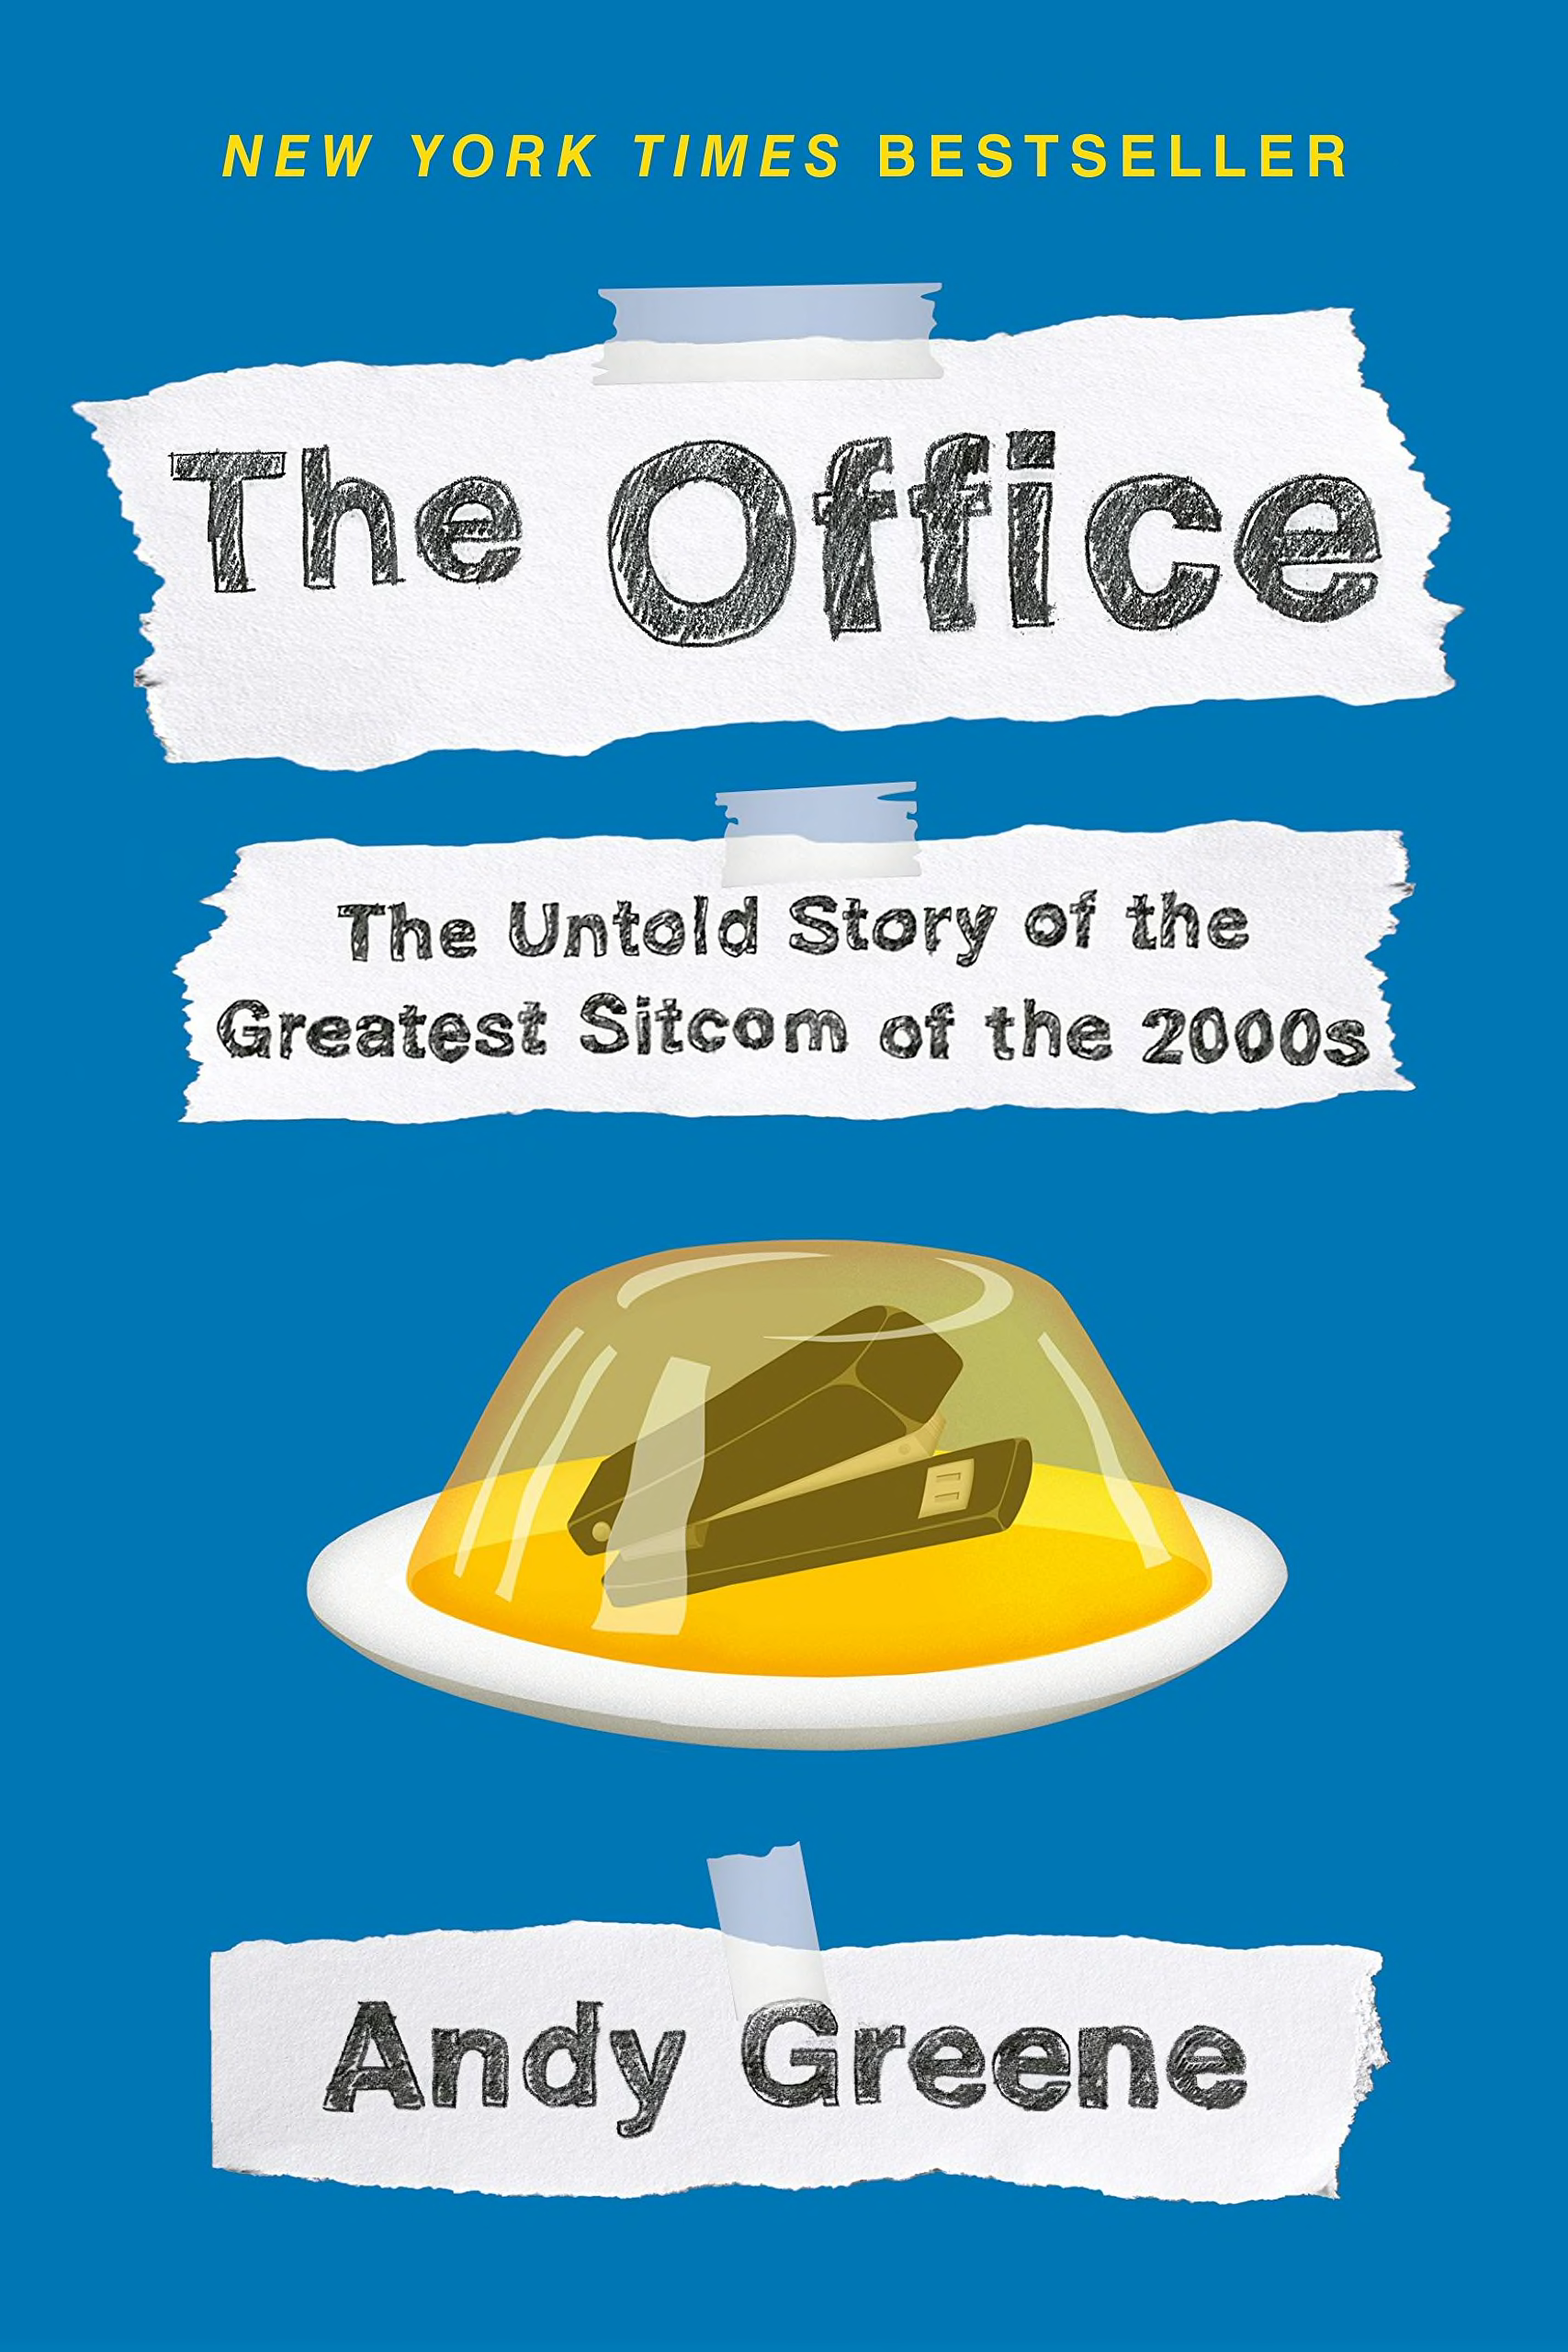 Discover Dutton's 'The Office: The Untold Story of the Greatest Sitcom of the 2000s: An Oral History' by Andy Greene on Amazon.